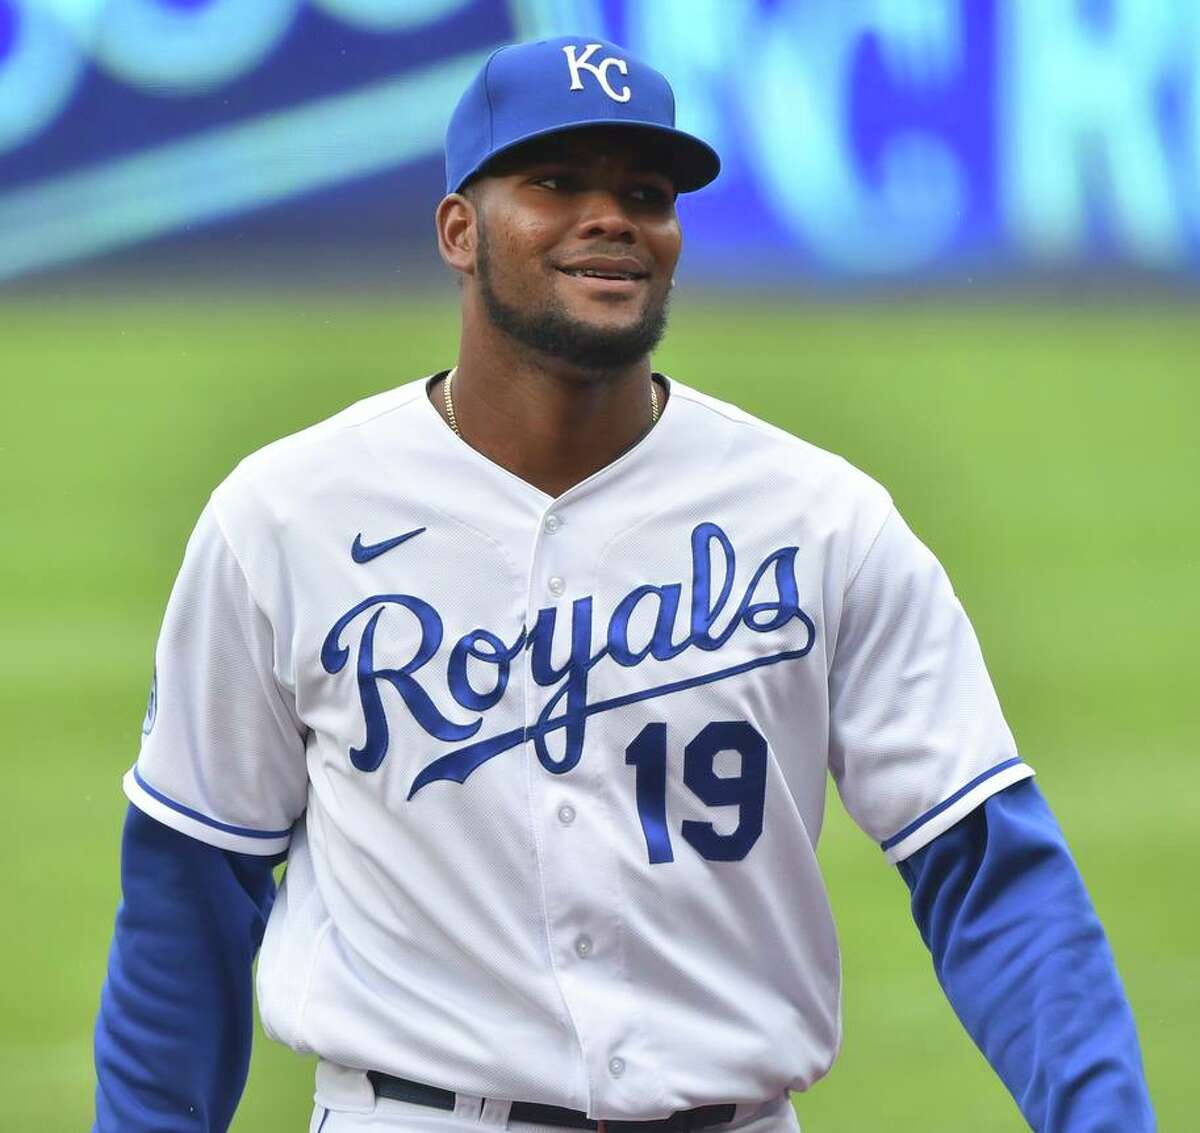 Franchy Cordero goes from Kansas City to Boston and Andrew Benintendi from the Red Sox to the Royals in a three-team trade.